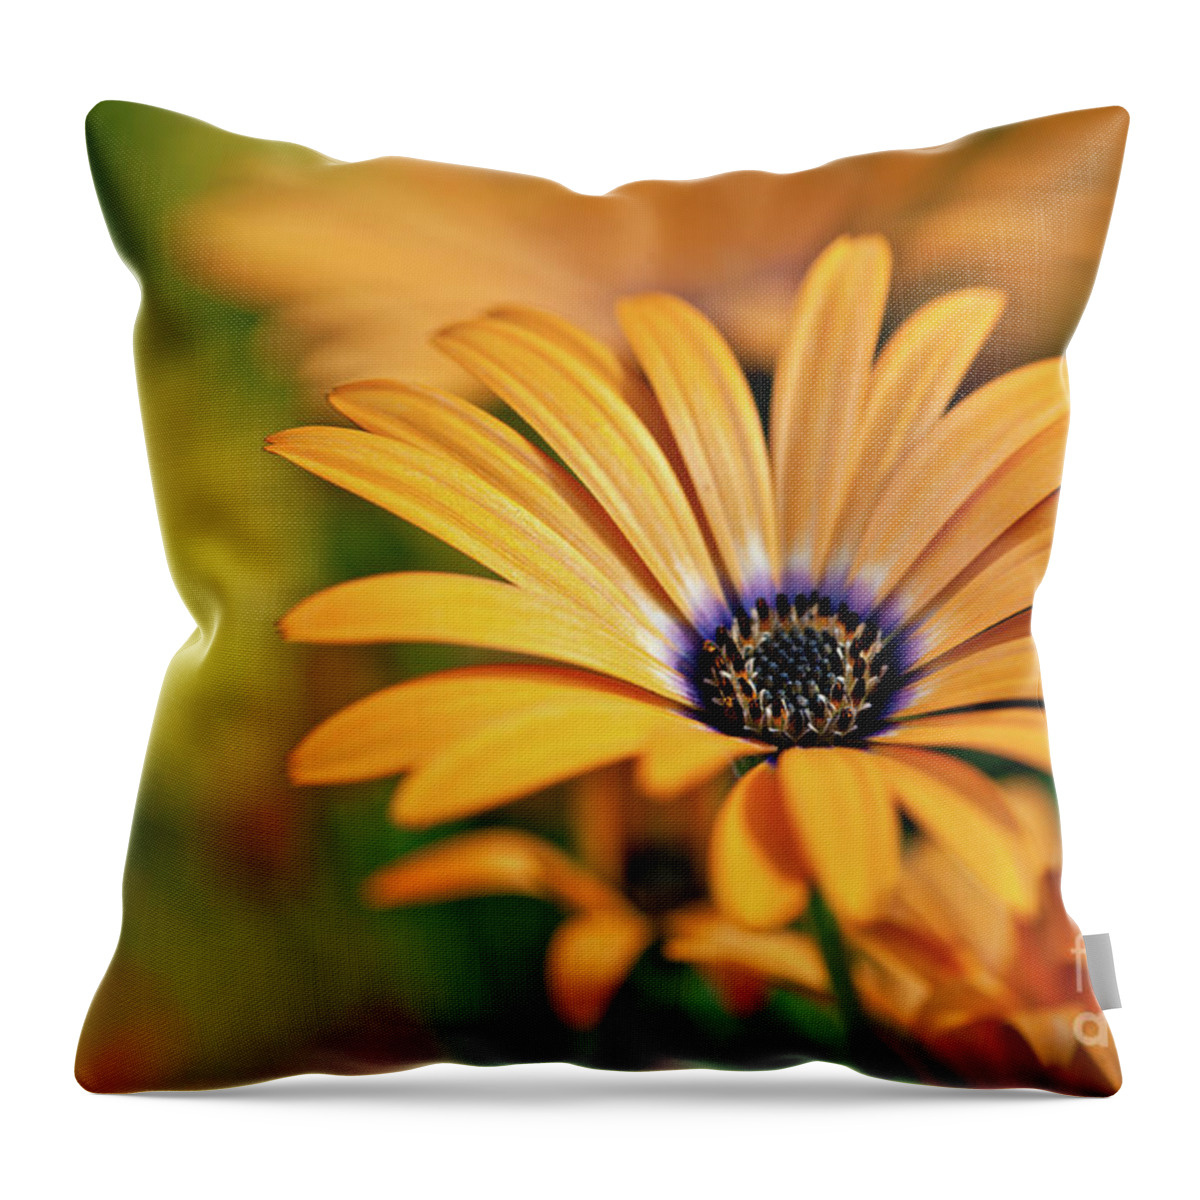 Botanical Throw Pillow featuring the photograph Orange Crush by Charles Dobbs